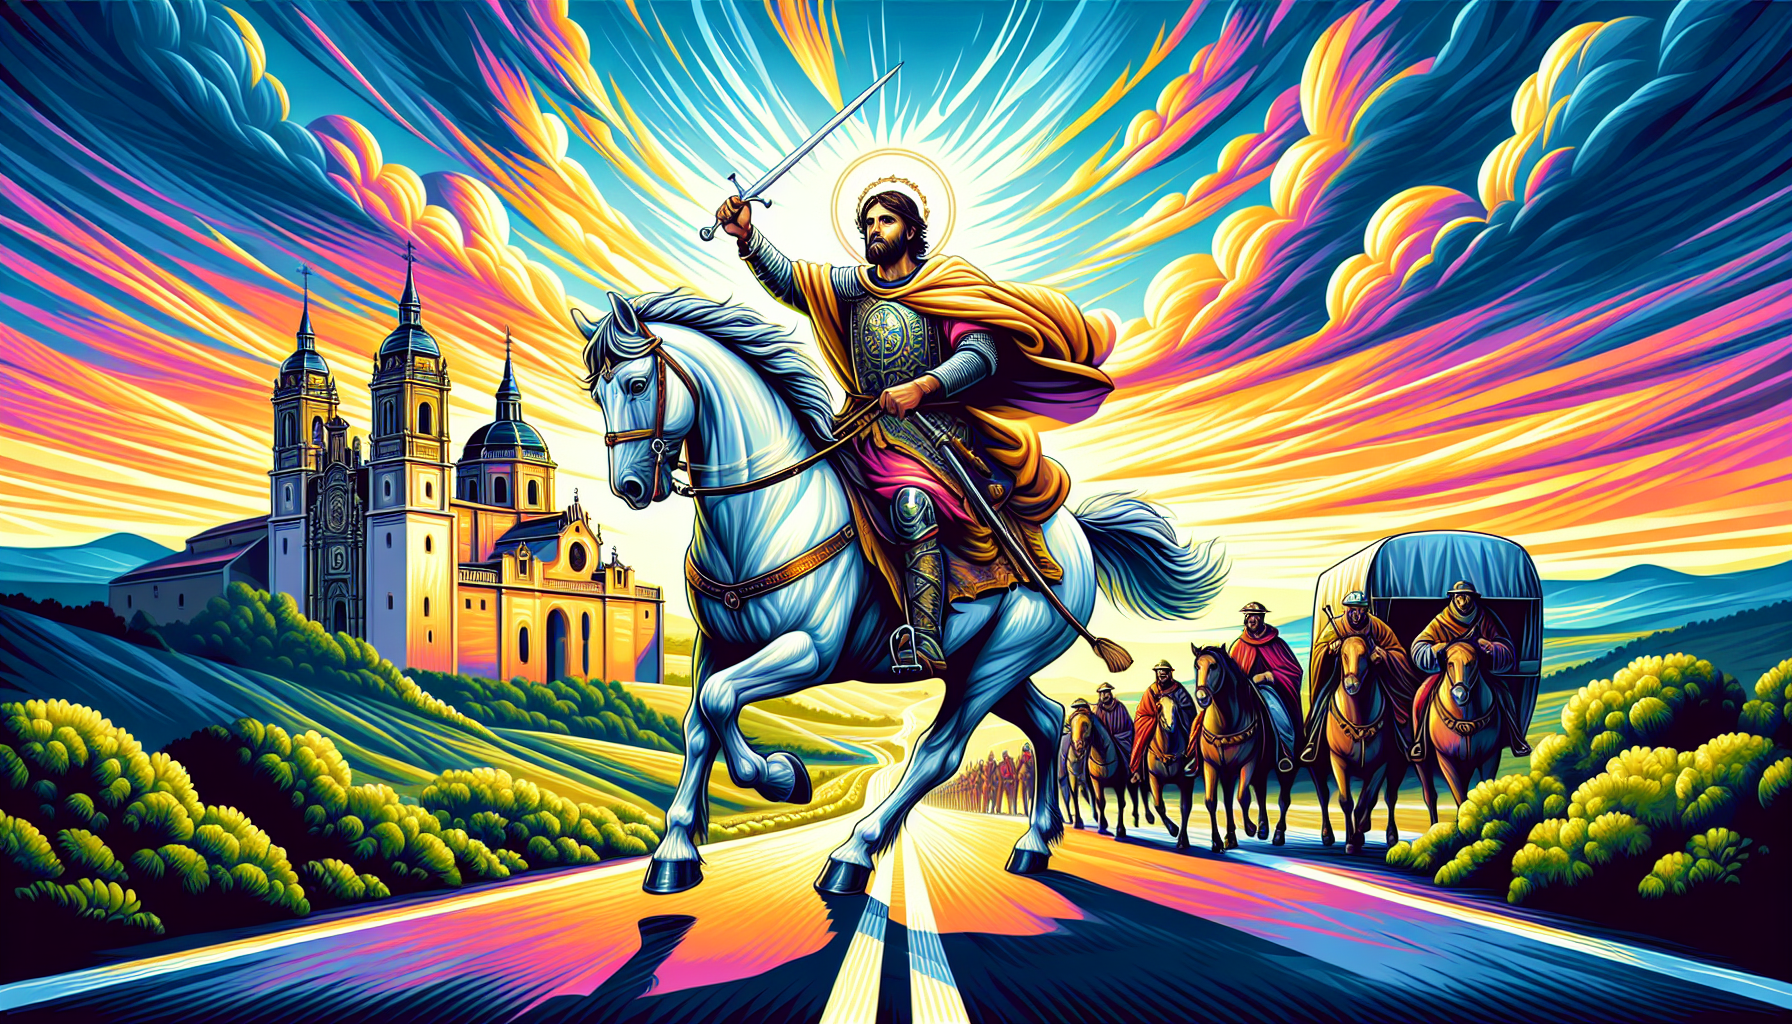 Colorful painting of the Apostle Saint James (Santiago Apóstol) riding a white horse, wielding a sword, under a dramatic sky, with medieval Spanish scenery in the background and groups of pilgrims on